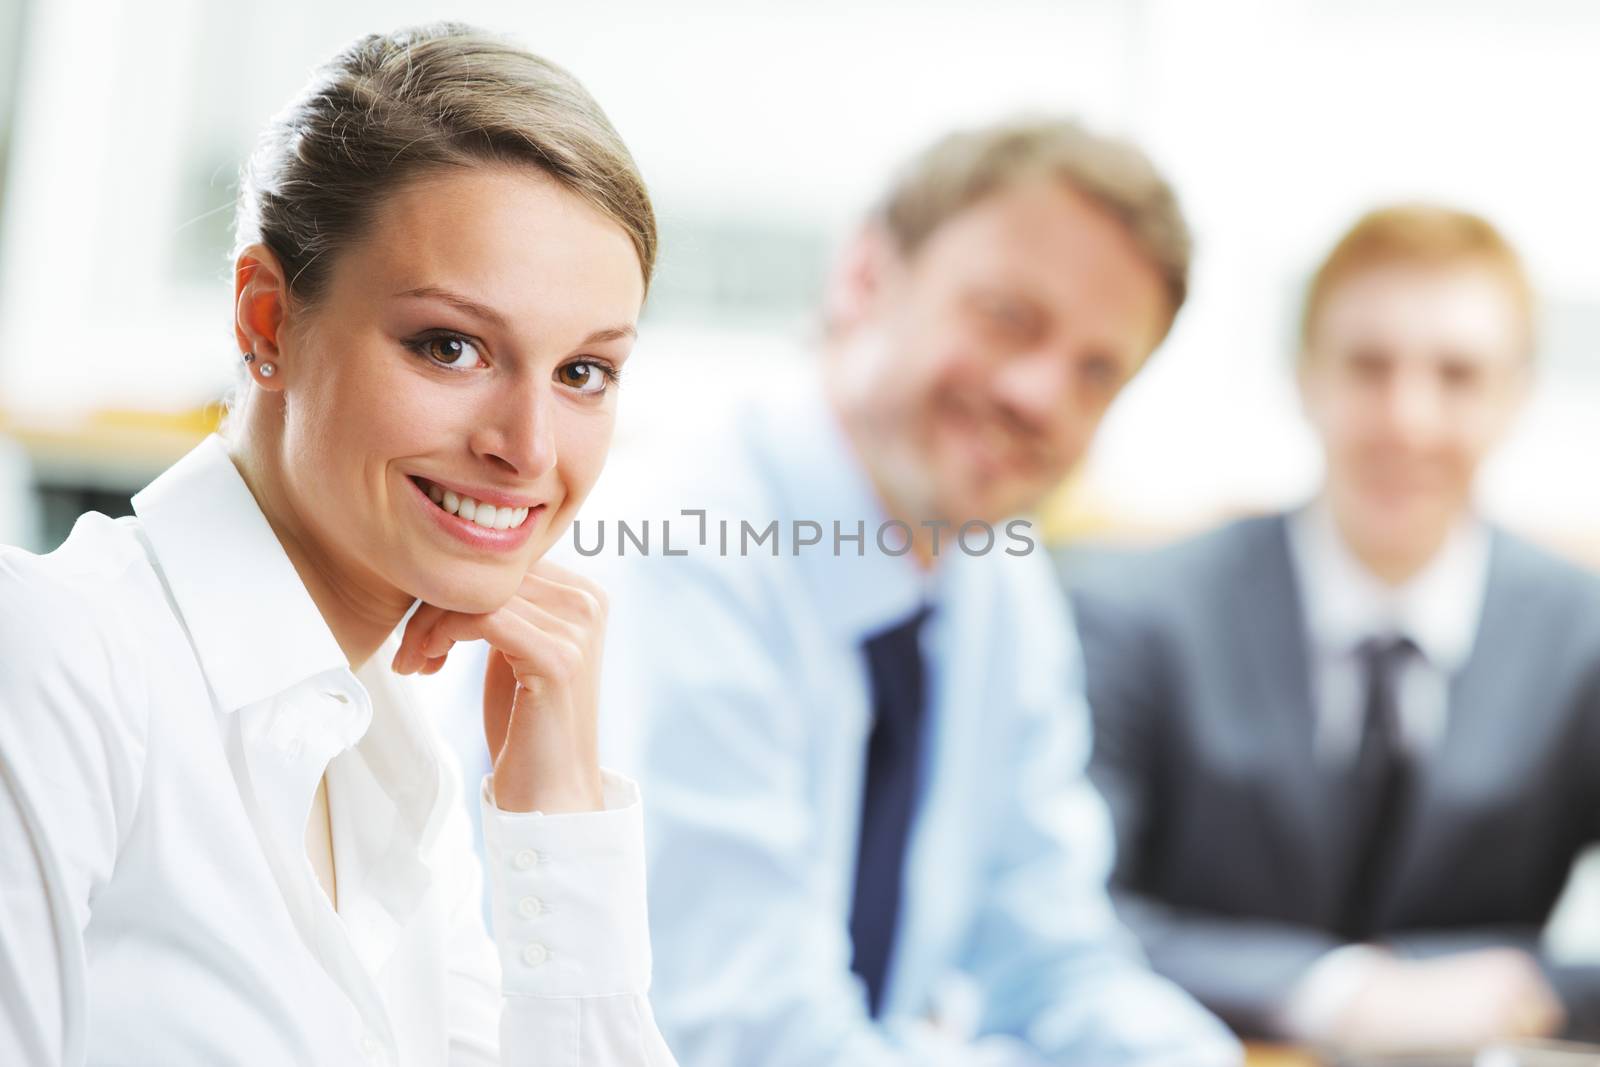 Portrait of a pretty young businesswoman smiling in a meeting with her colleagues in background